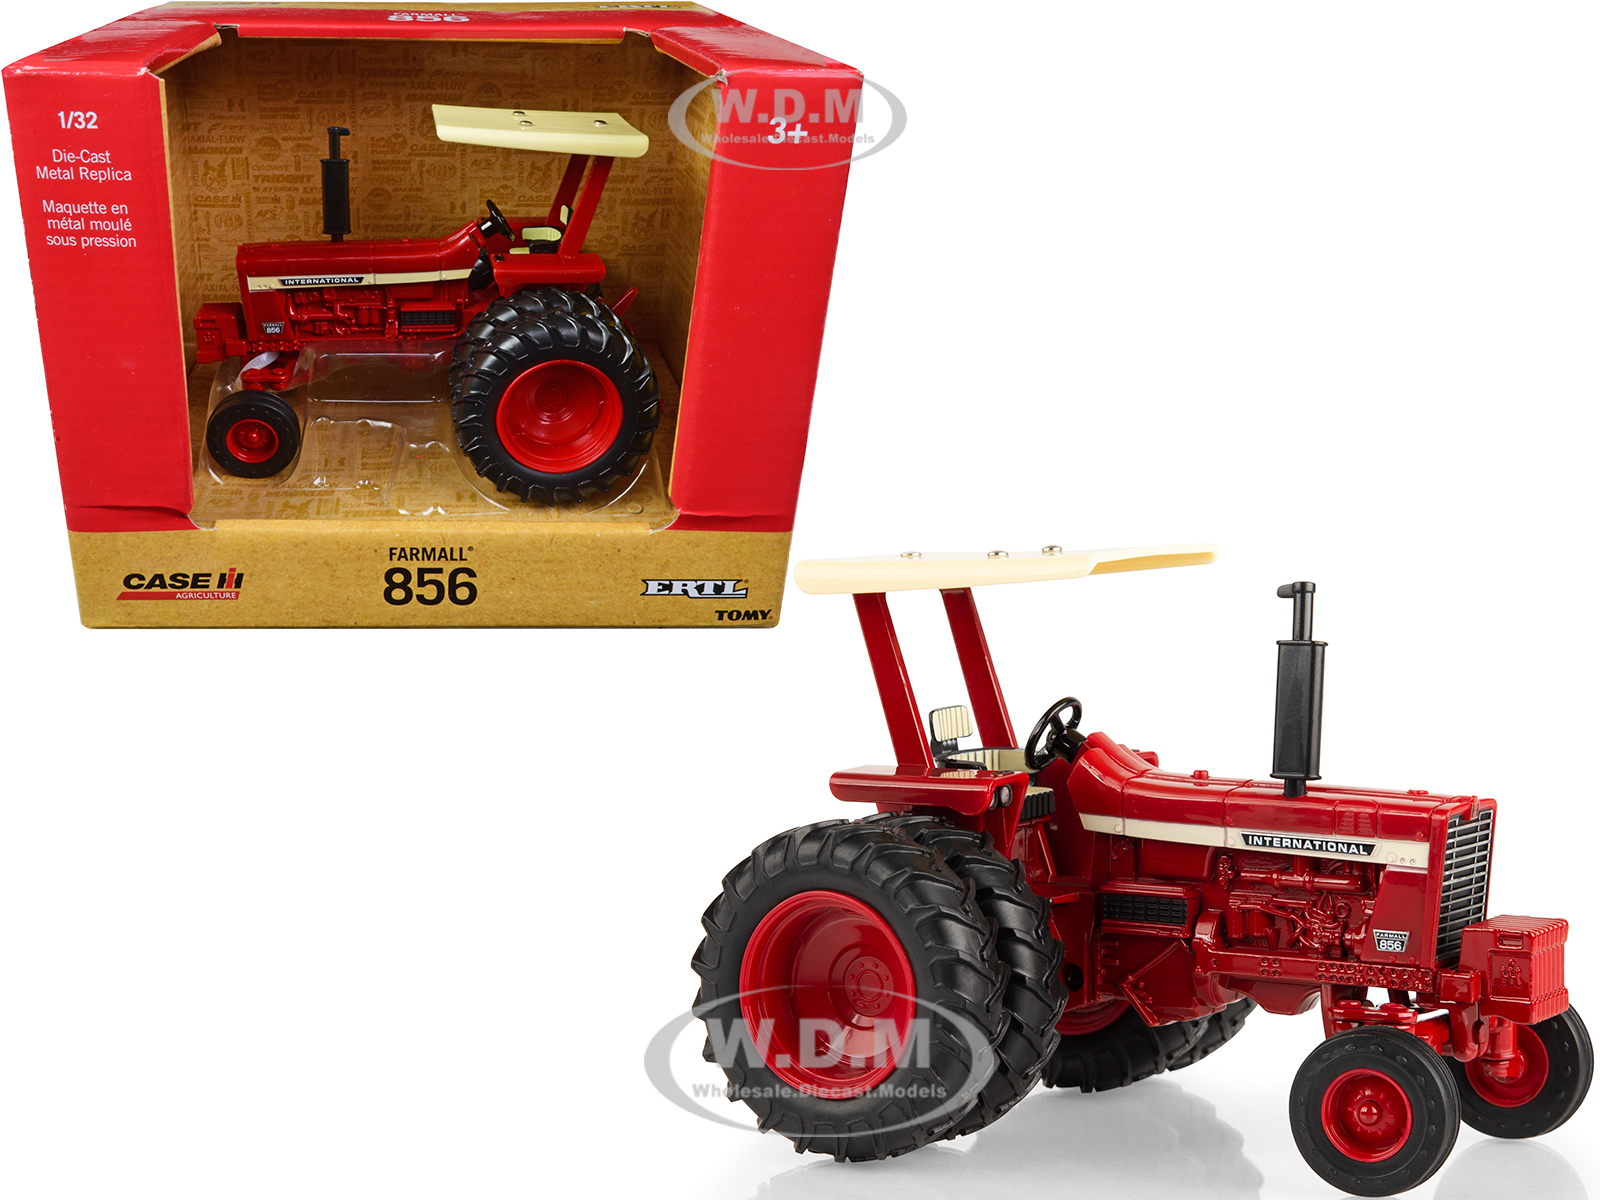 Farmall 856 Tractor With Canopy Red With Dual Wheels Case IH Agriculture Series 1/32 Diecast Model By ERTL TOMY